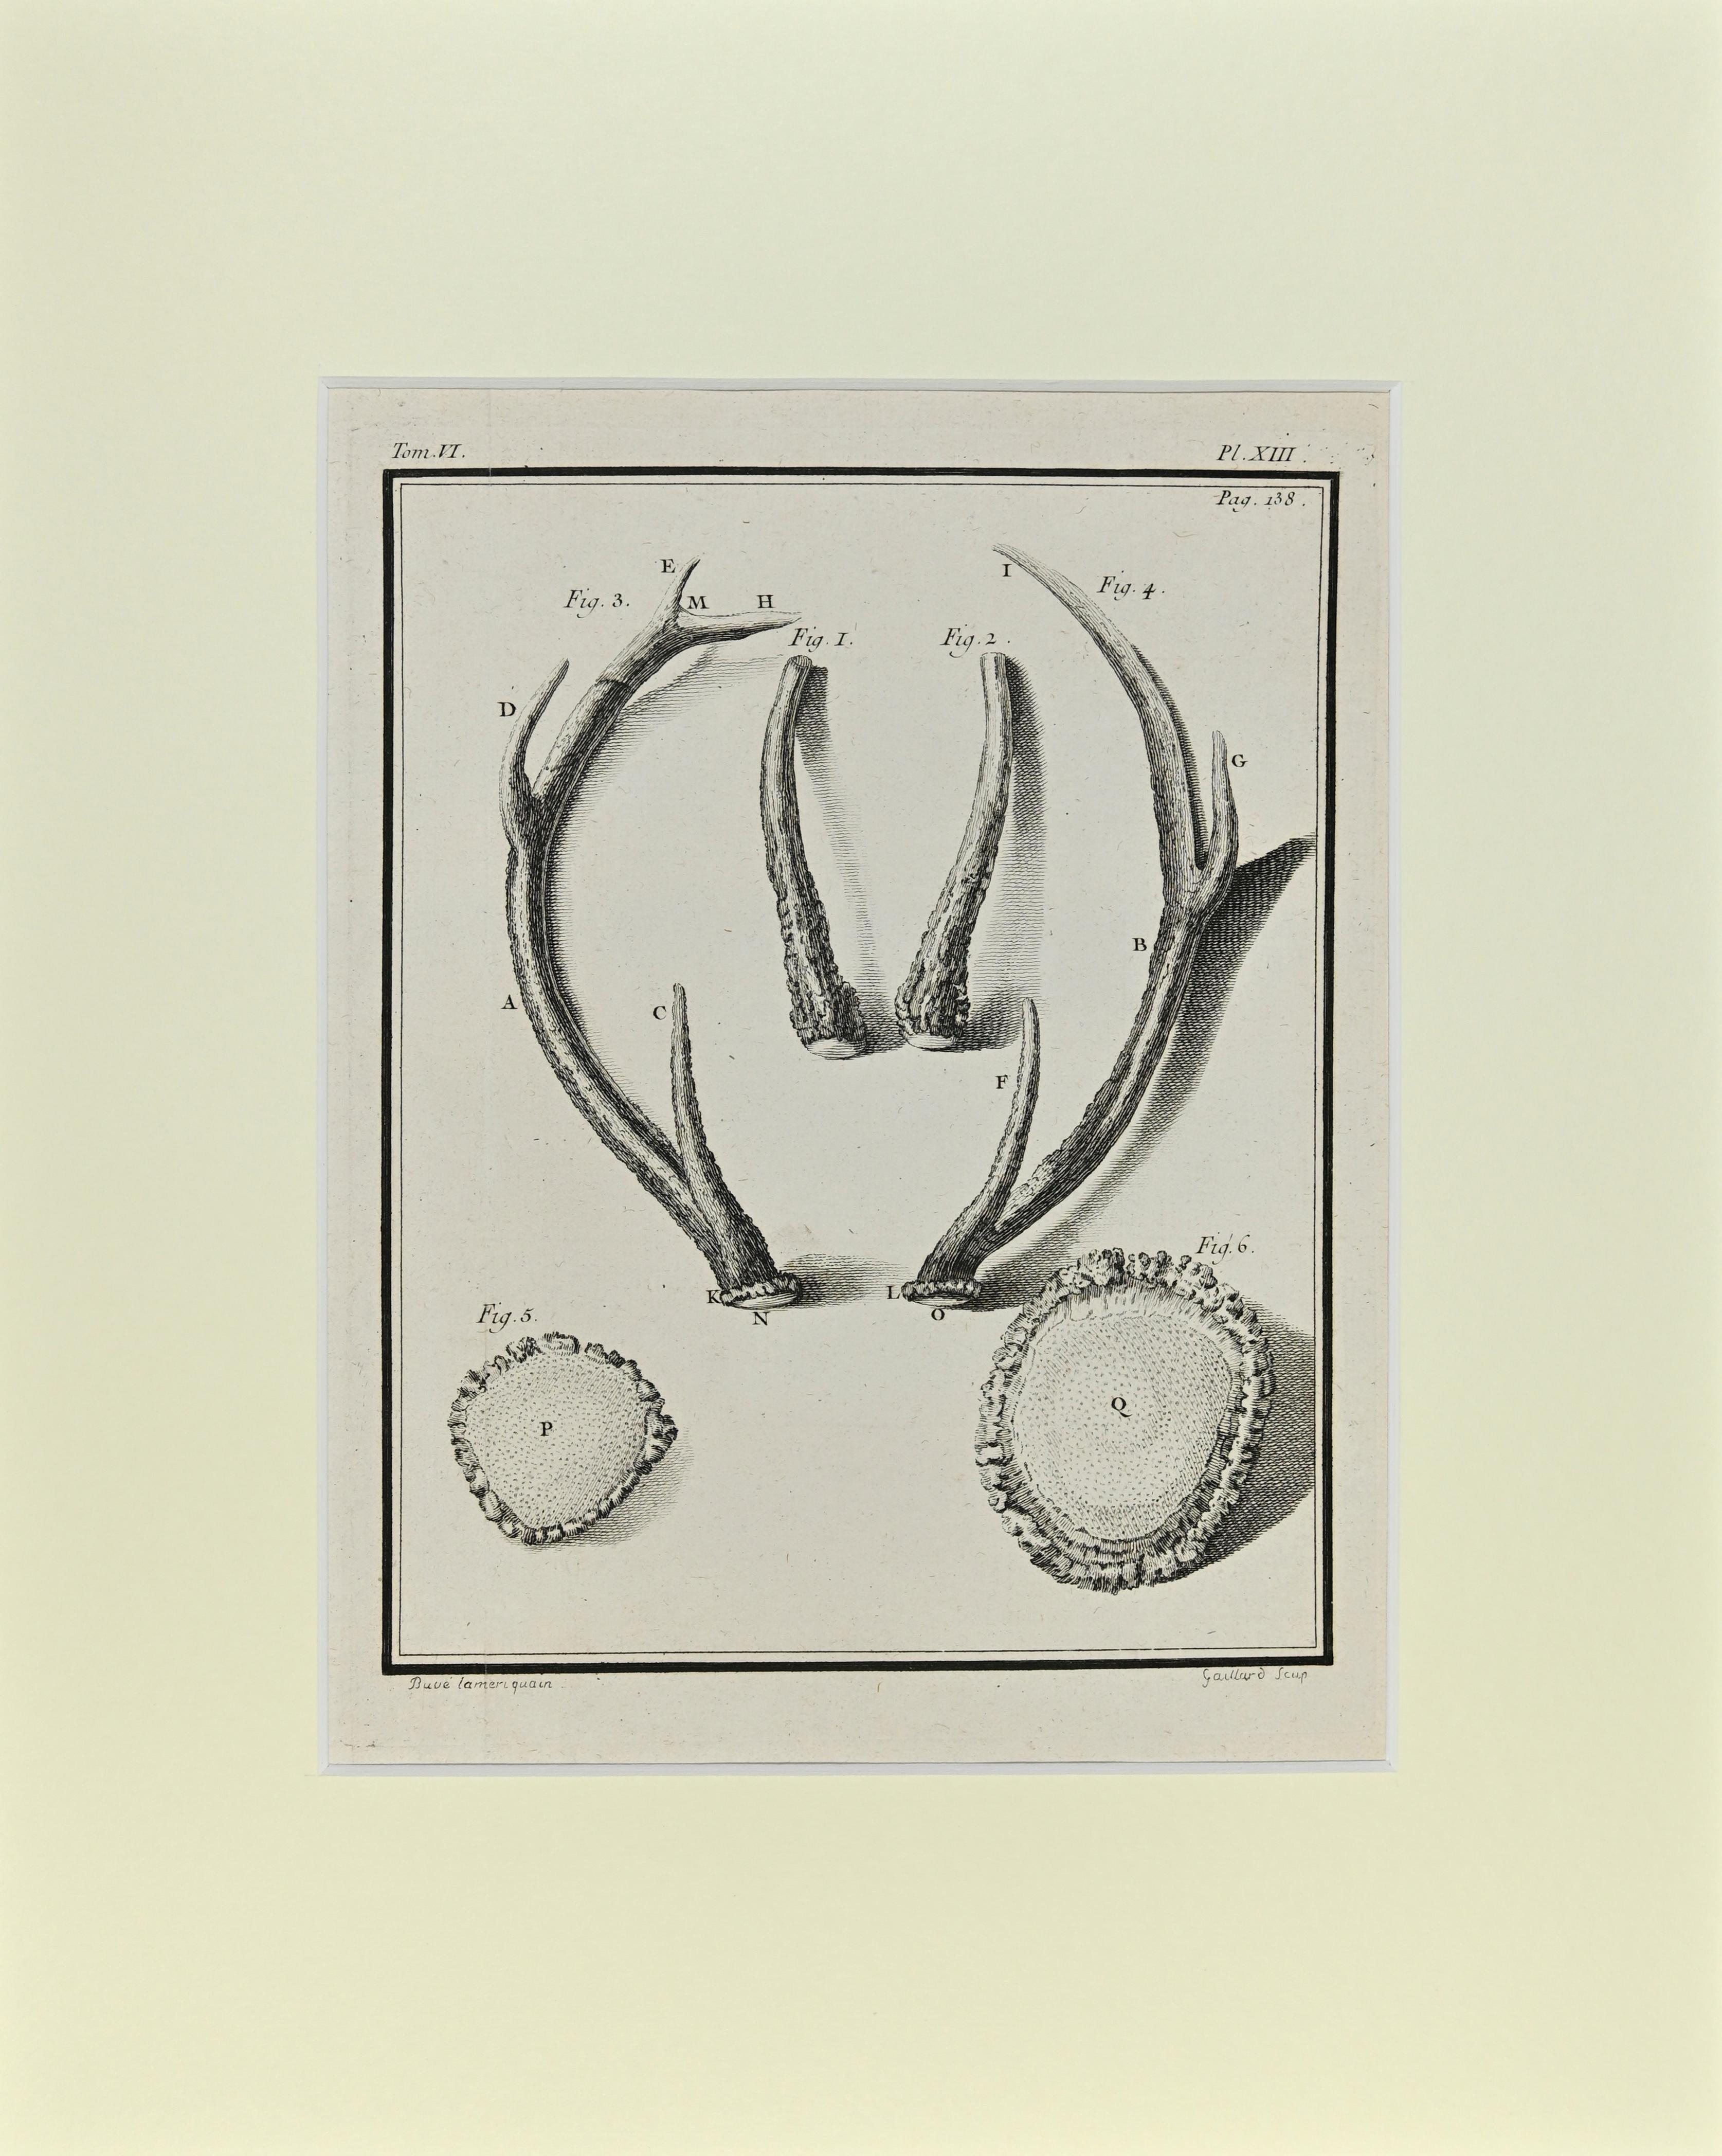 Deer horns is an artwork realized  by  Buvée l'Américain in 1771.  

Etching B./W. print  on ivory paper. Signed on  plate on the lower left margin.

The work is glued on cardboard. Total dimensions: 35x28 cm.

The artwork belongs to the suite